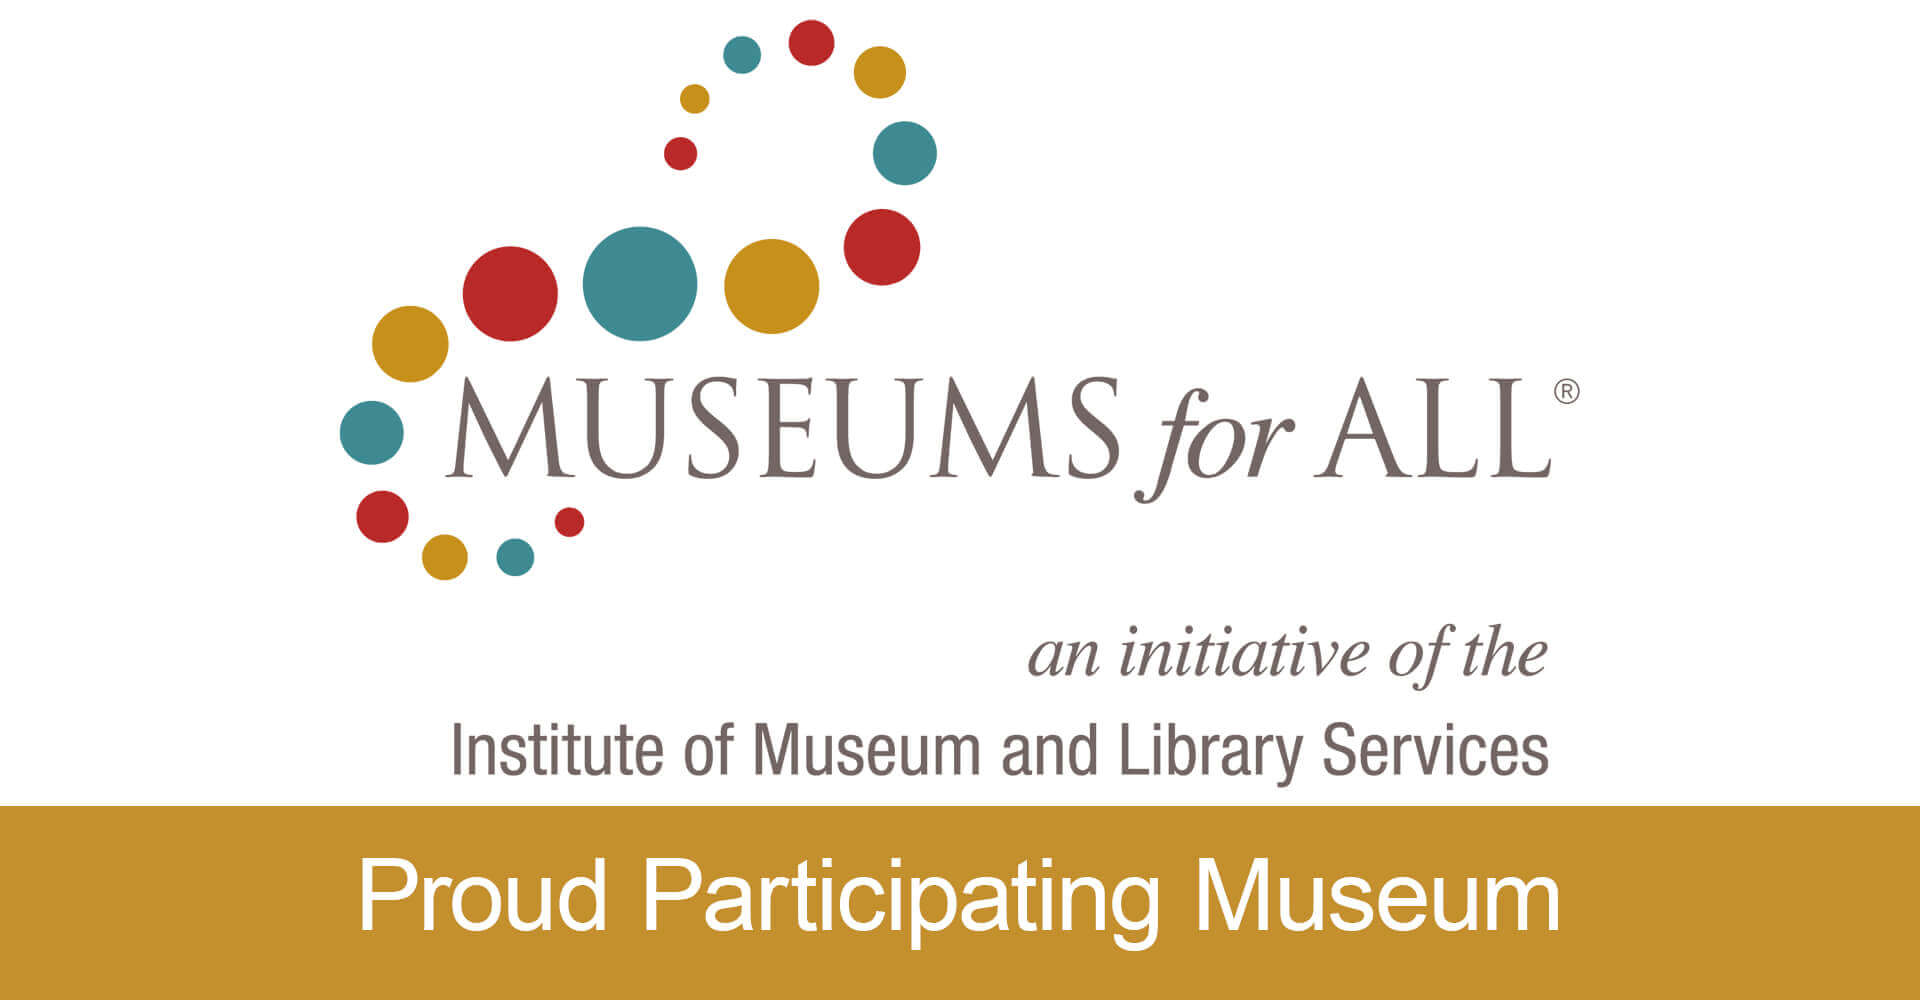 THE ALF MUSEUM JOINS THE MUSEUMS FOR ALL INITIATIVE